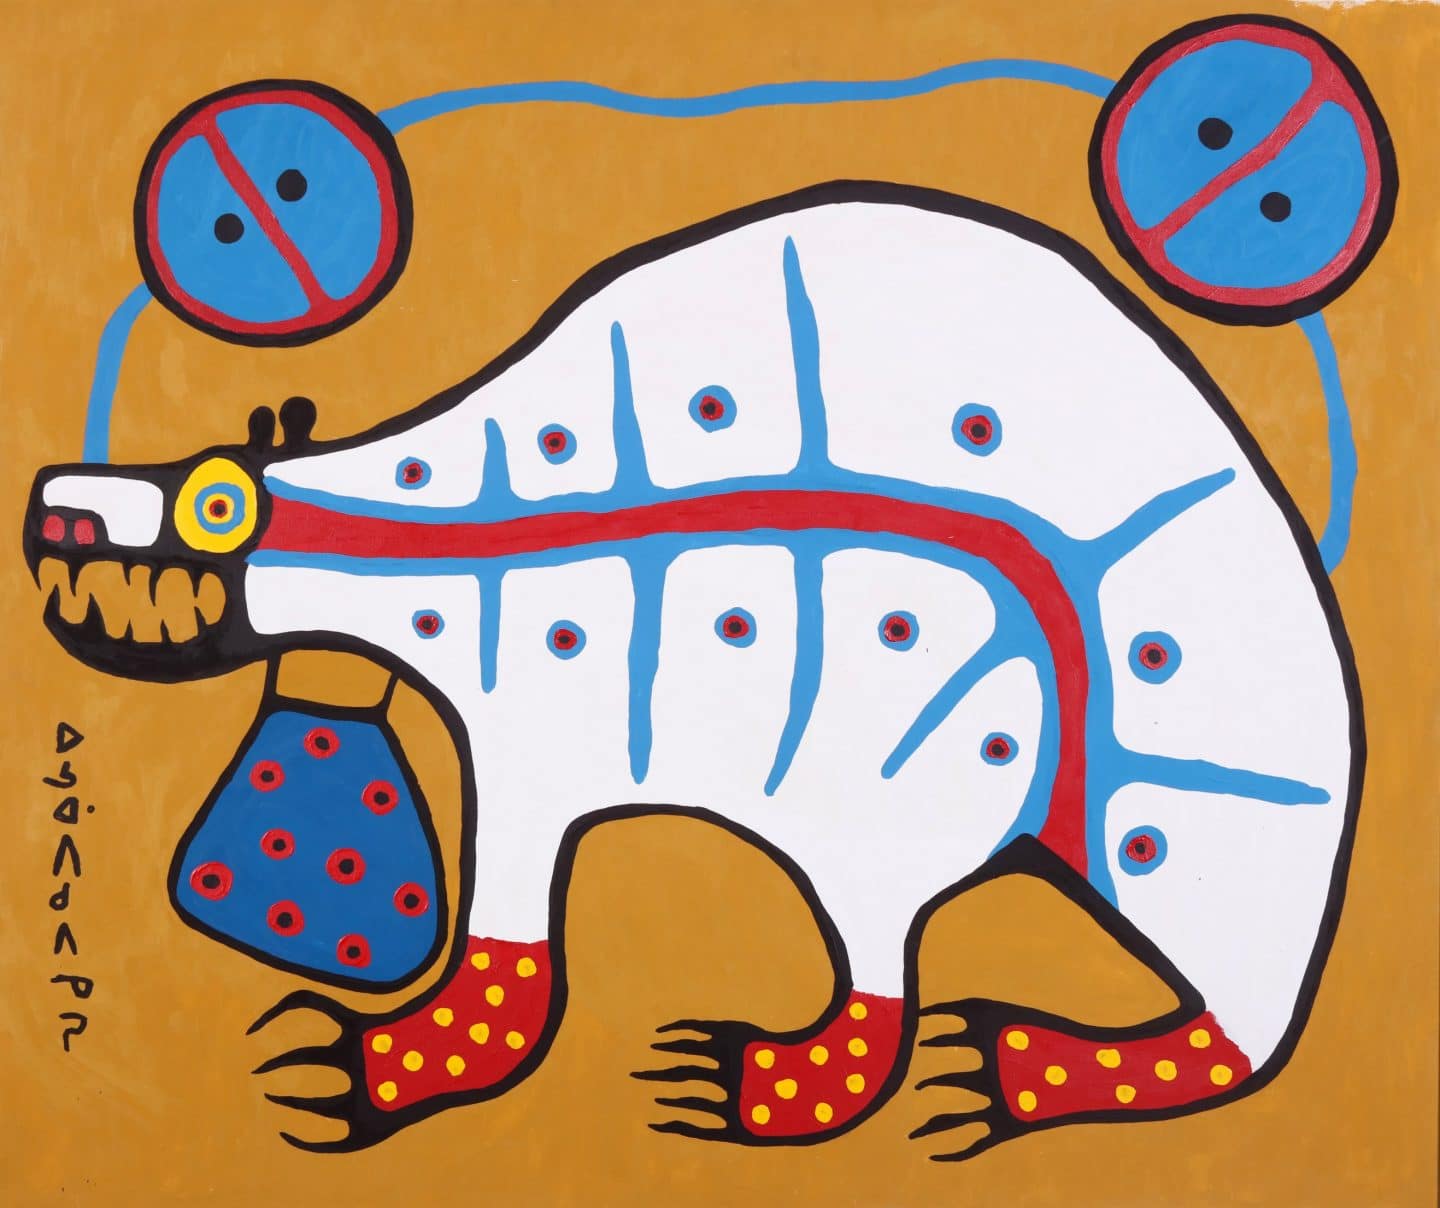 Norval Morrisseau, Sacred Medicine Bear, 1974, acrylic on canvas. Gift of Guardian Capital Group Limited, 2020. Permissions from the estate of Norval Morrisseau. OfficialMorrisseau.com